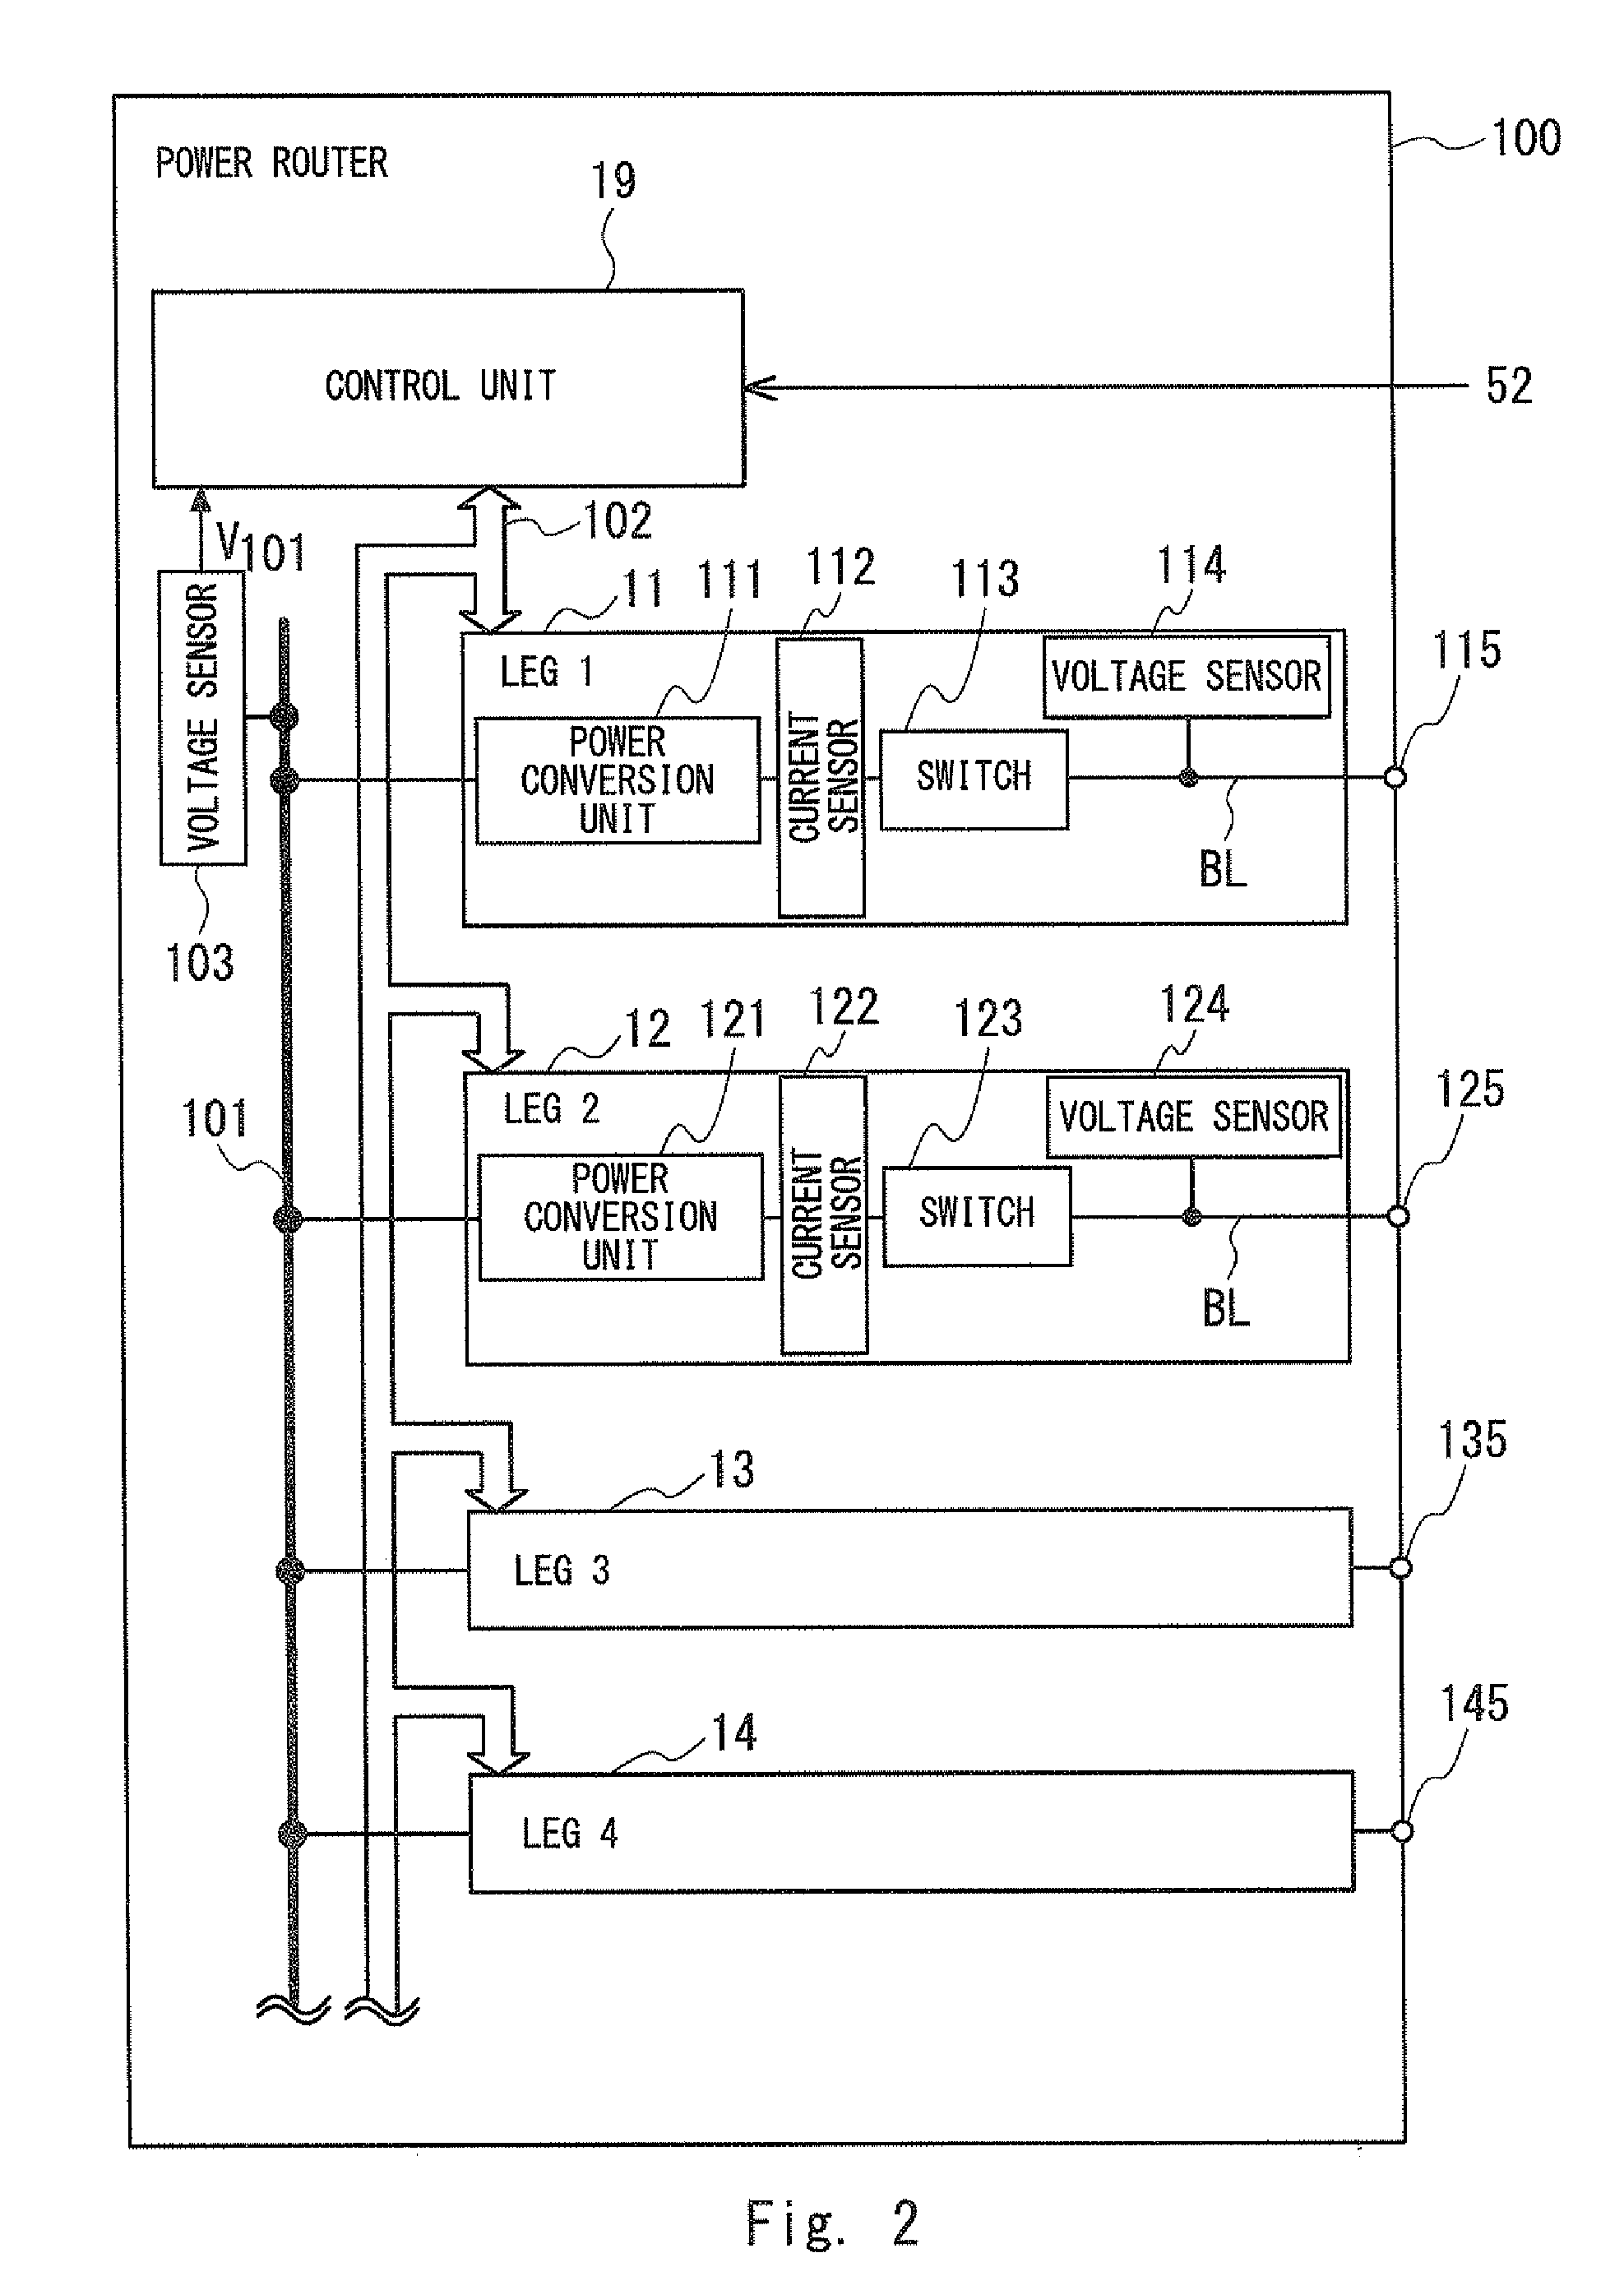 Power router and operation control method thereof, power network system, and non-transitory computer readable media storing program